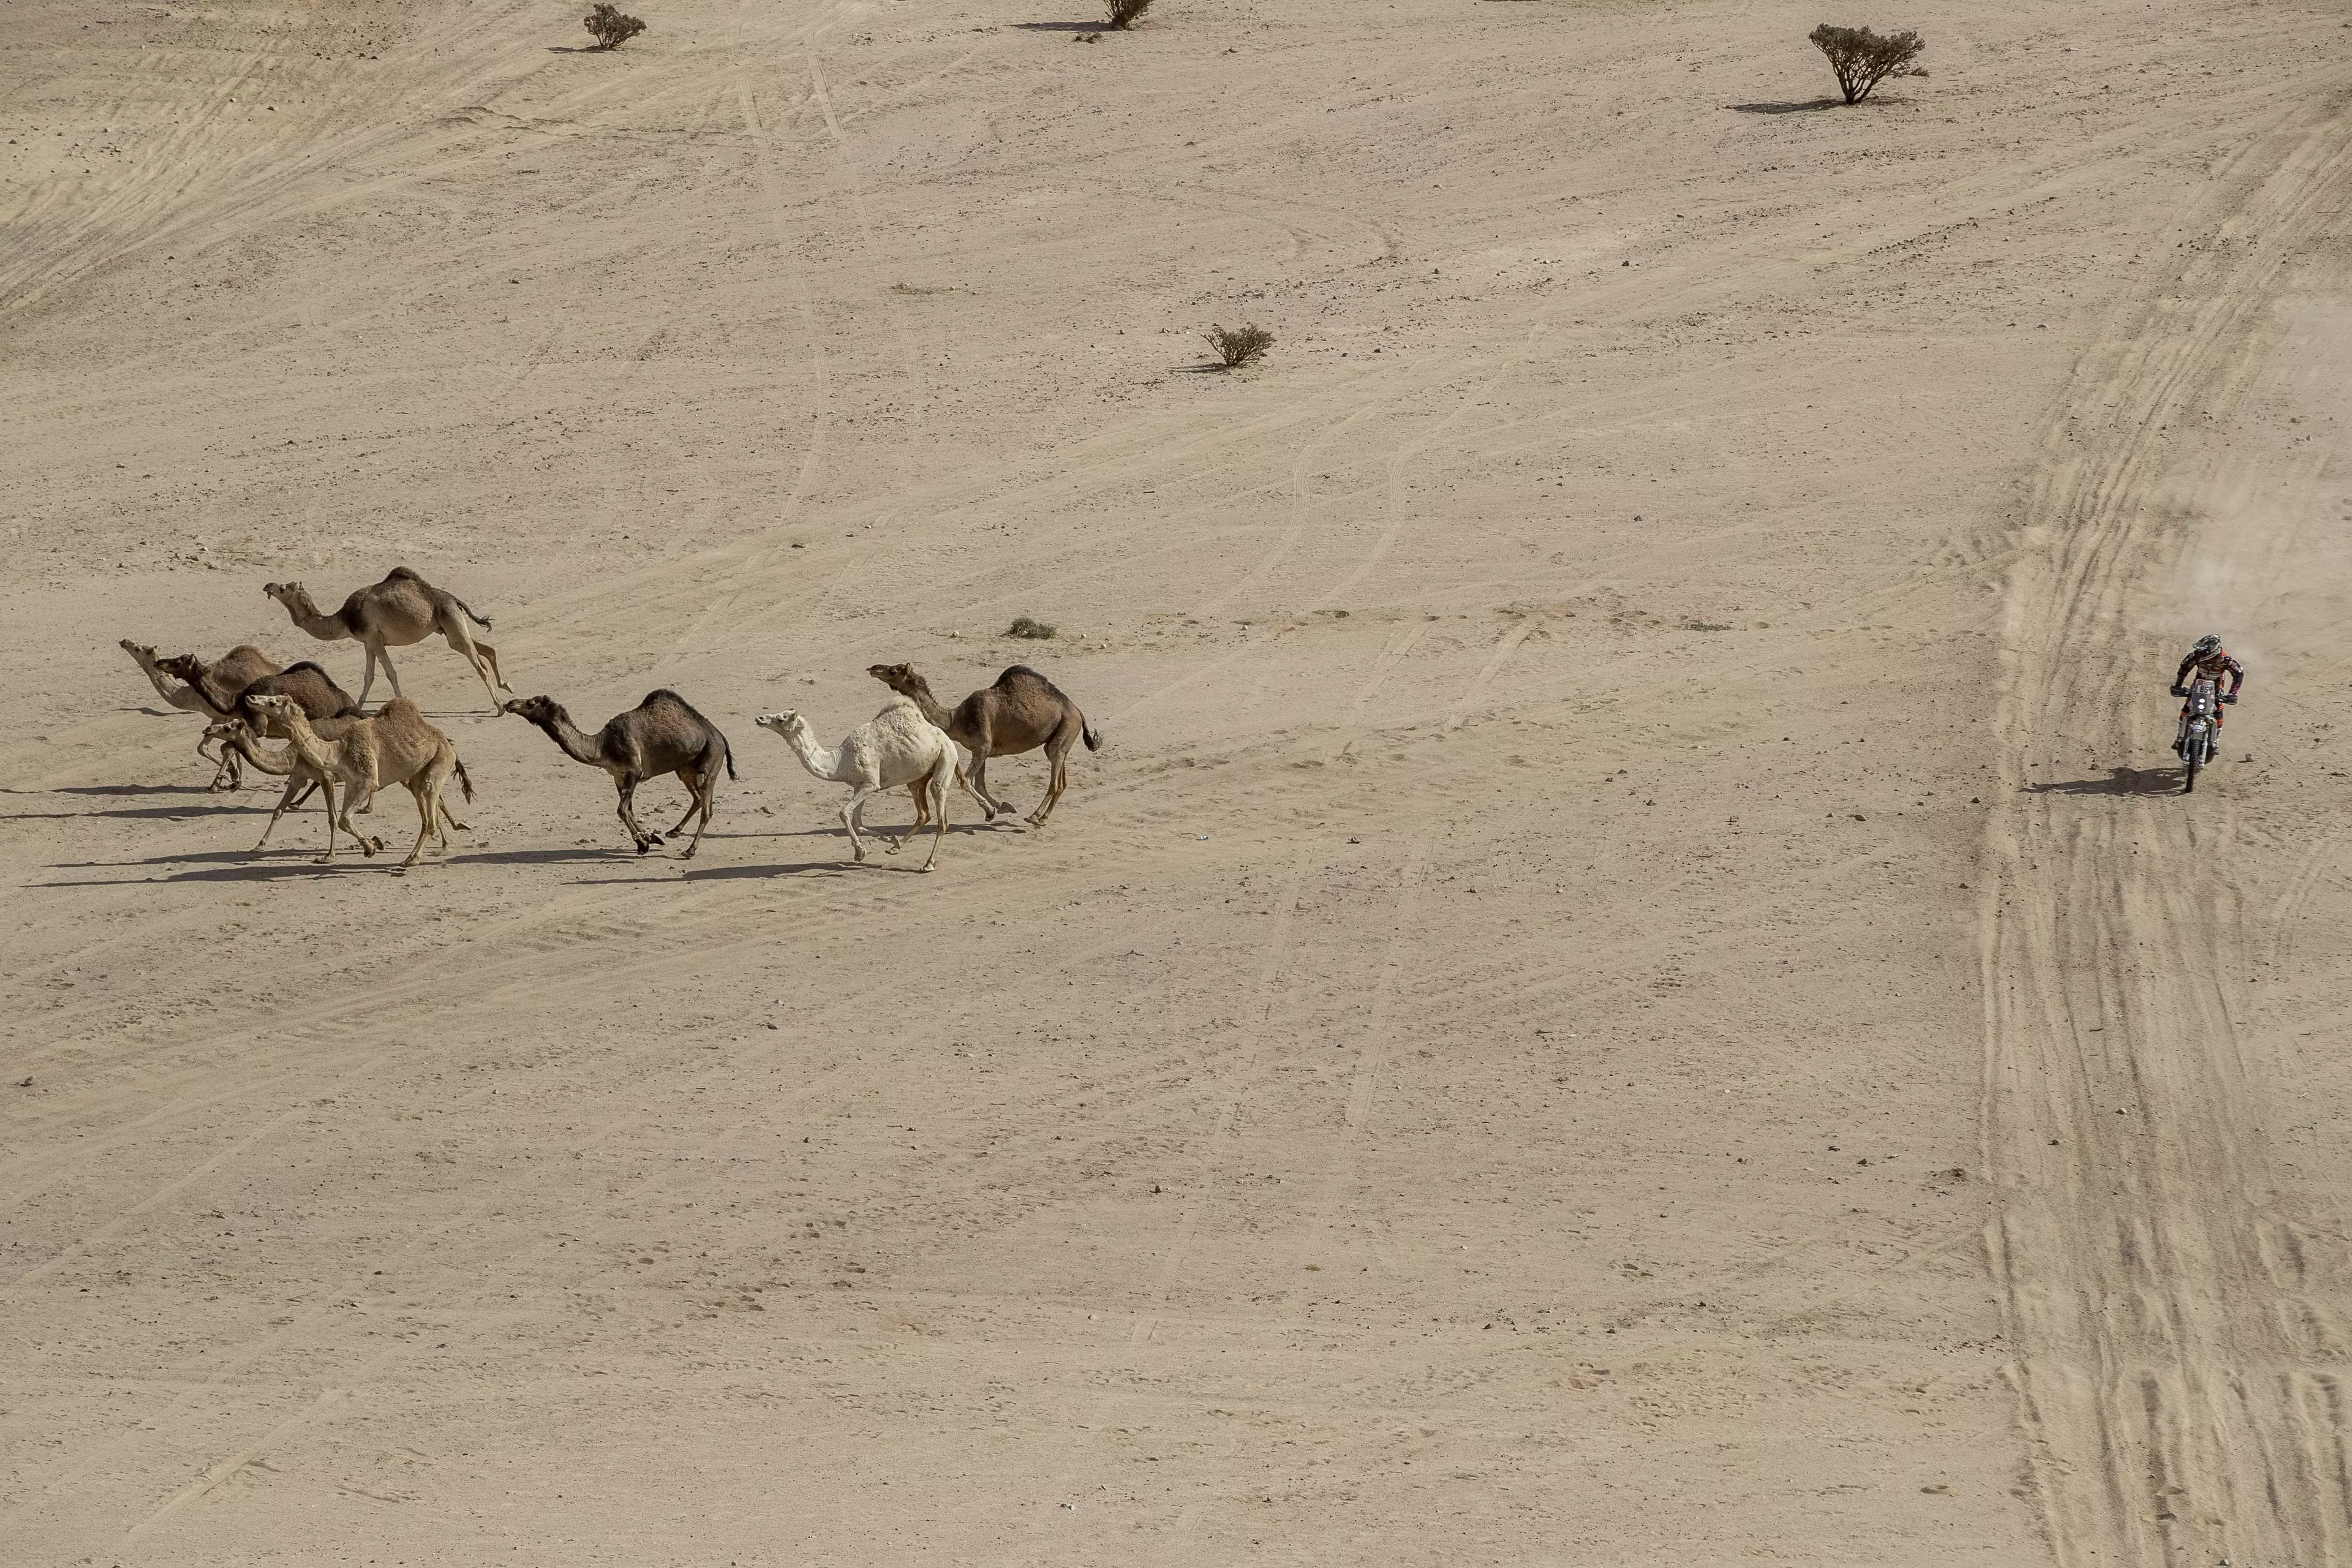 The camels will be shot from helicopters.